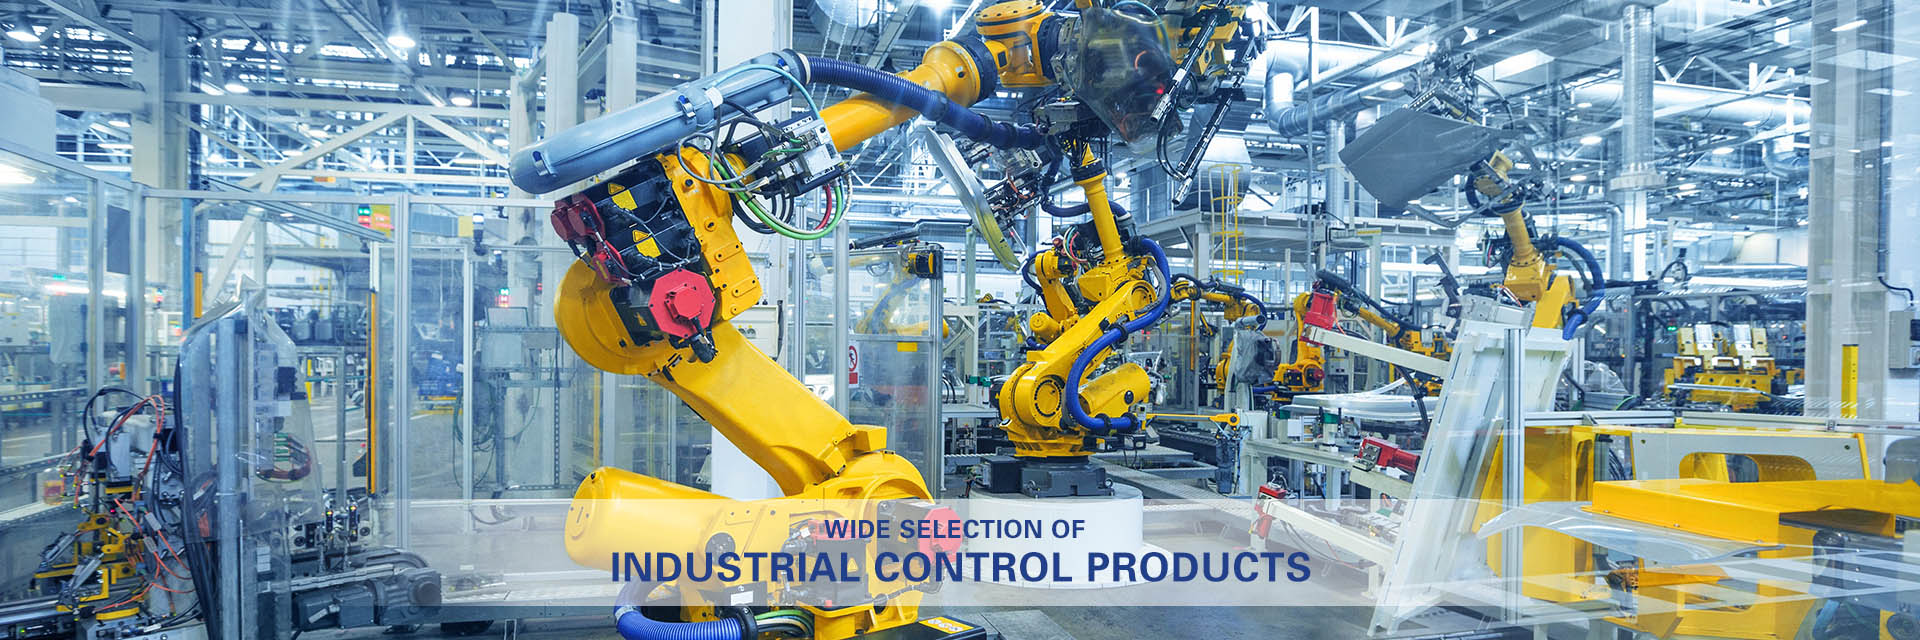 WIDE SELECTION OF  INDUSTRIAL CONTROL PRODUCTS